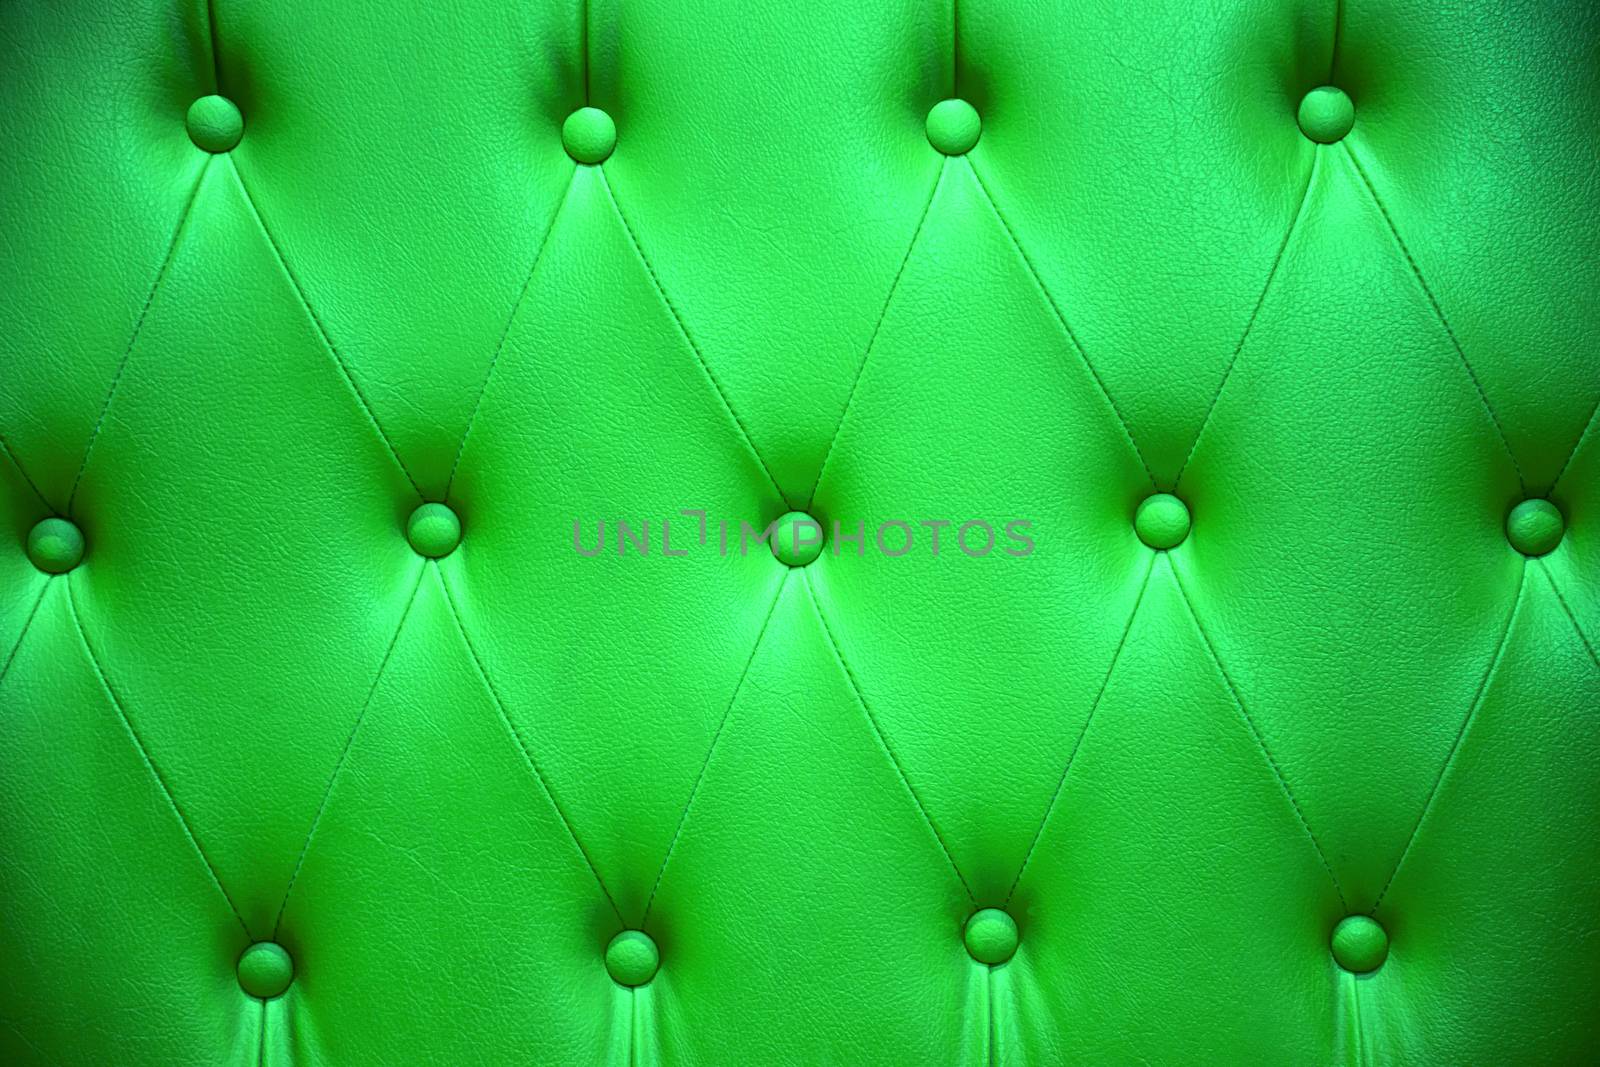 Emerald green color of upholstery leather pattern as background by jakgree